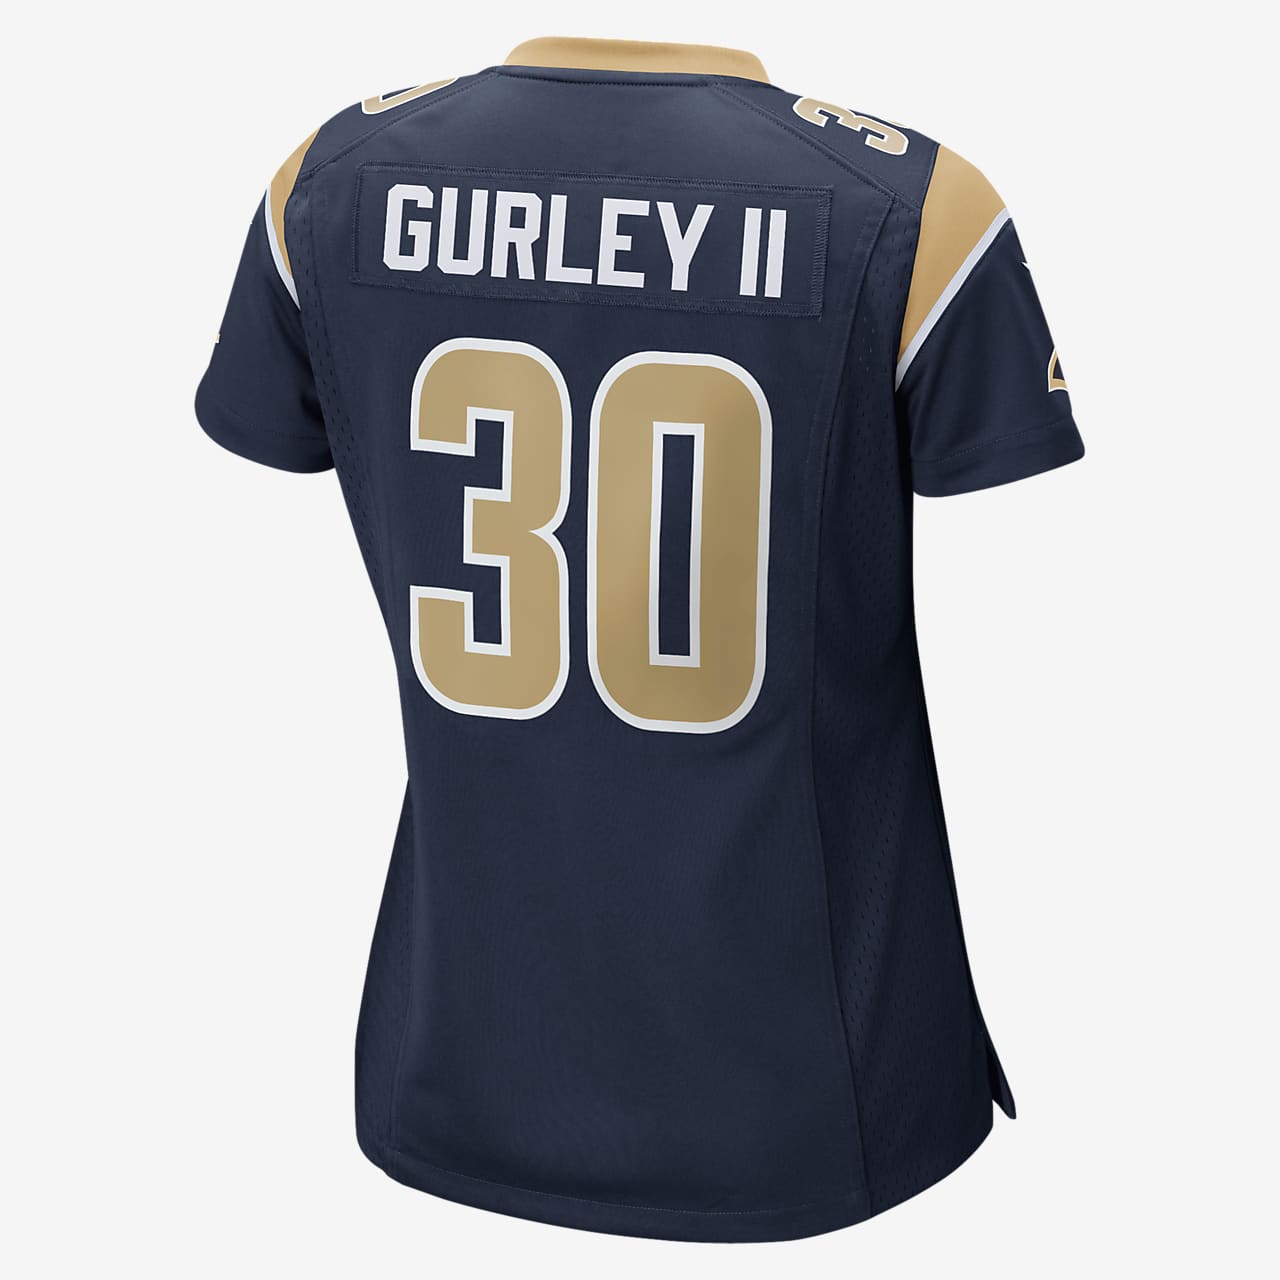 los angeles rams home jersey